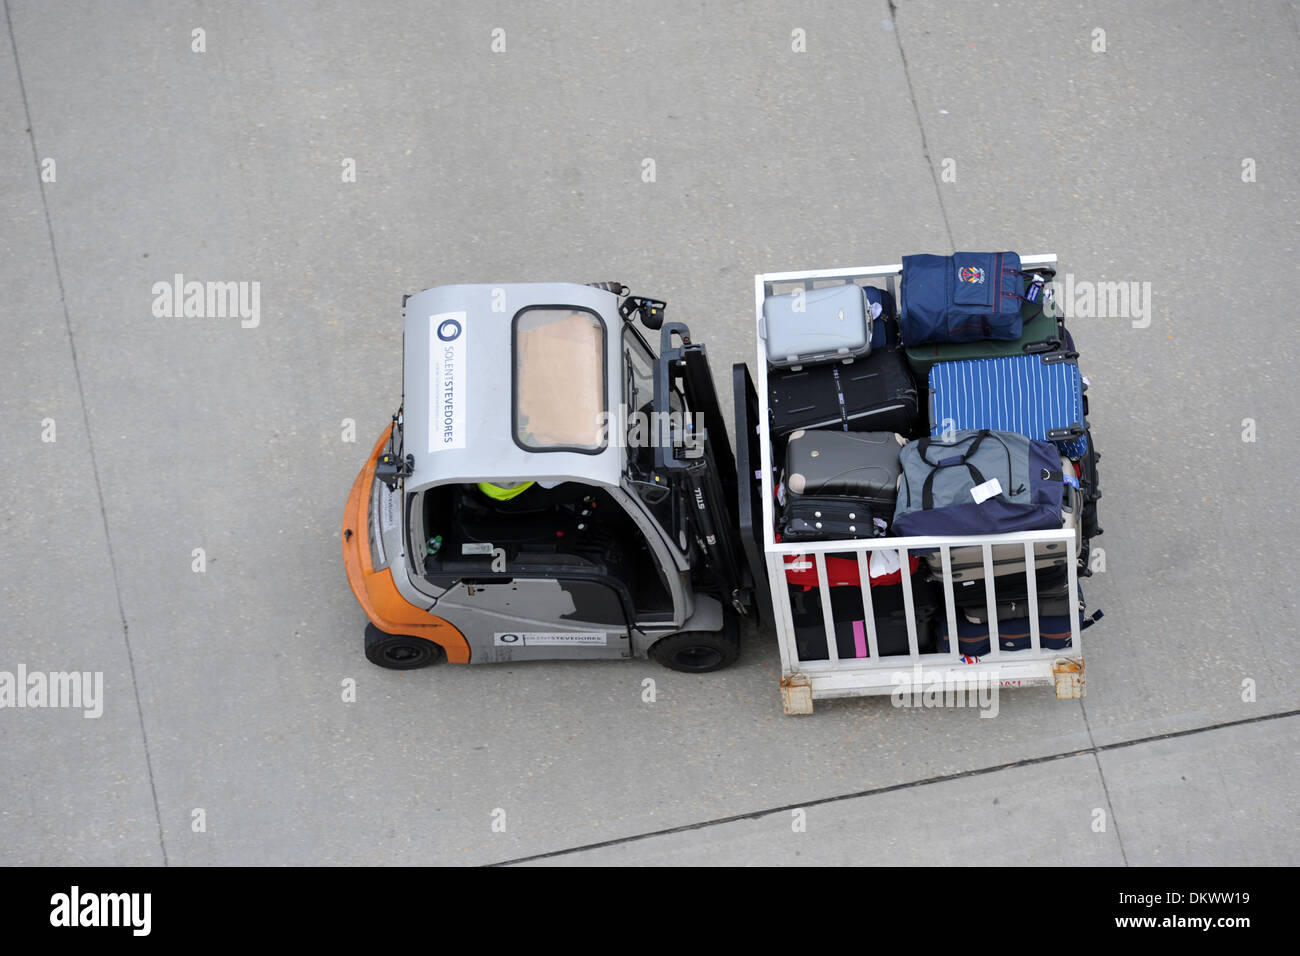 A forklift truck transporting suitcases. Stock Photo